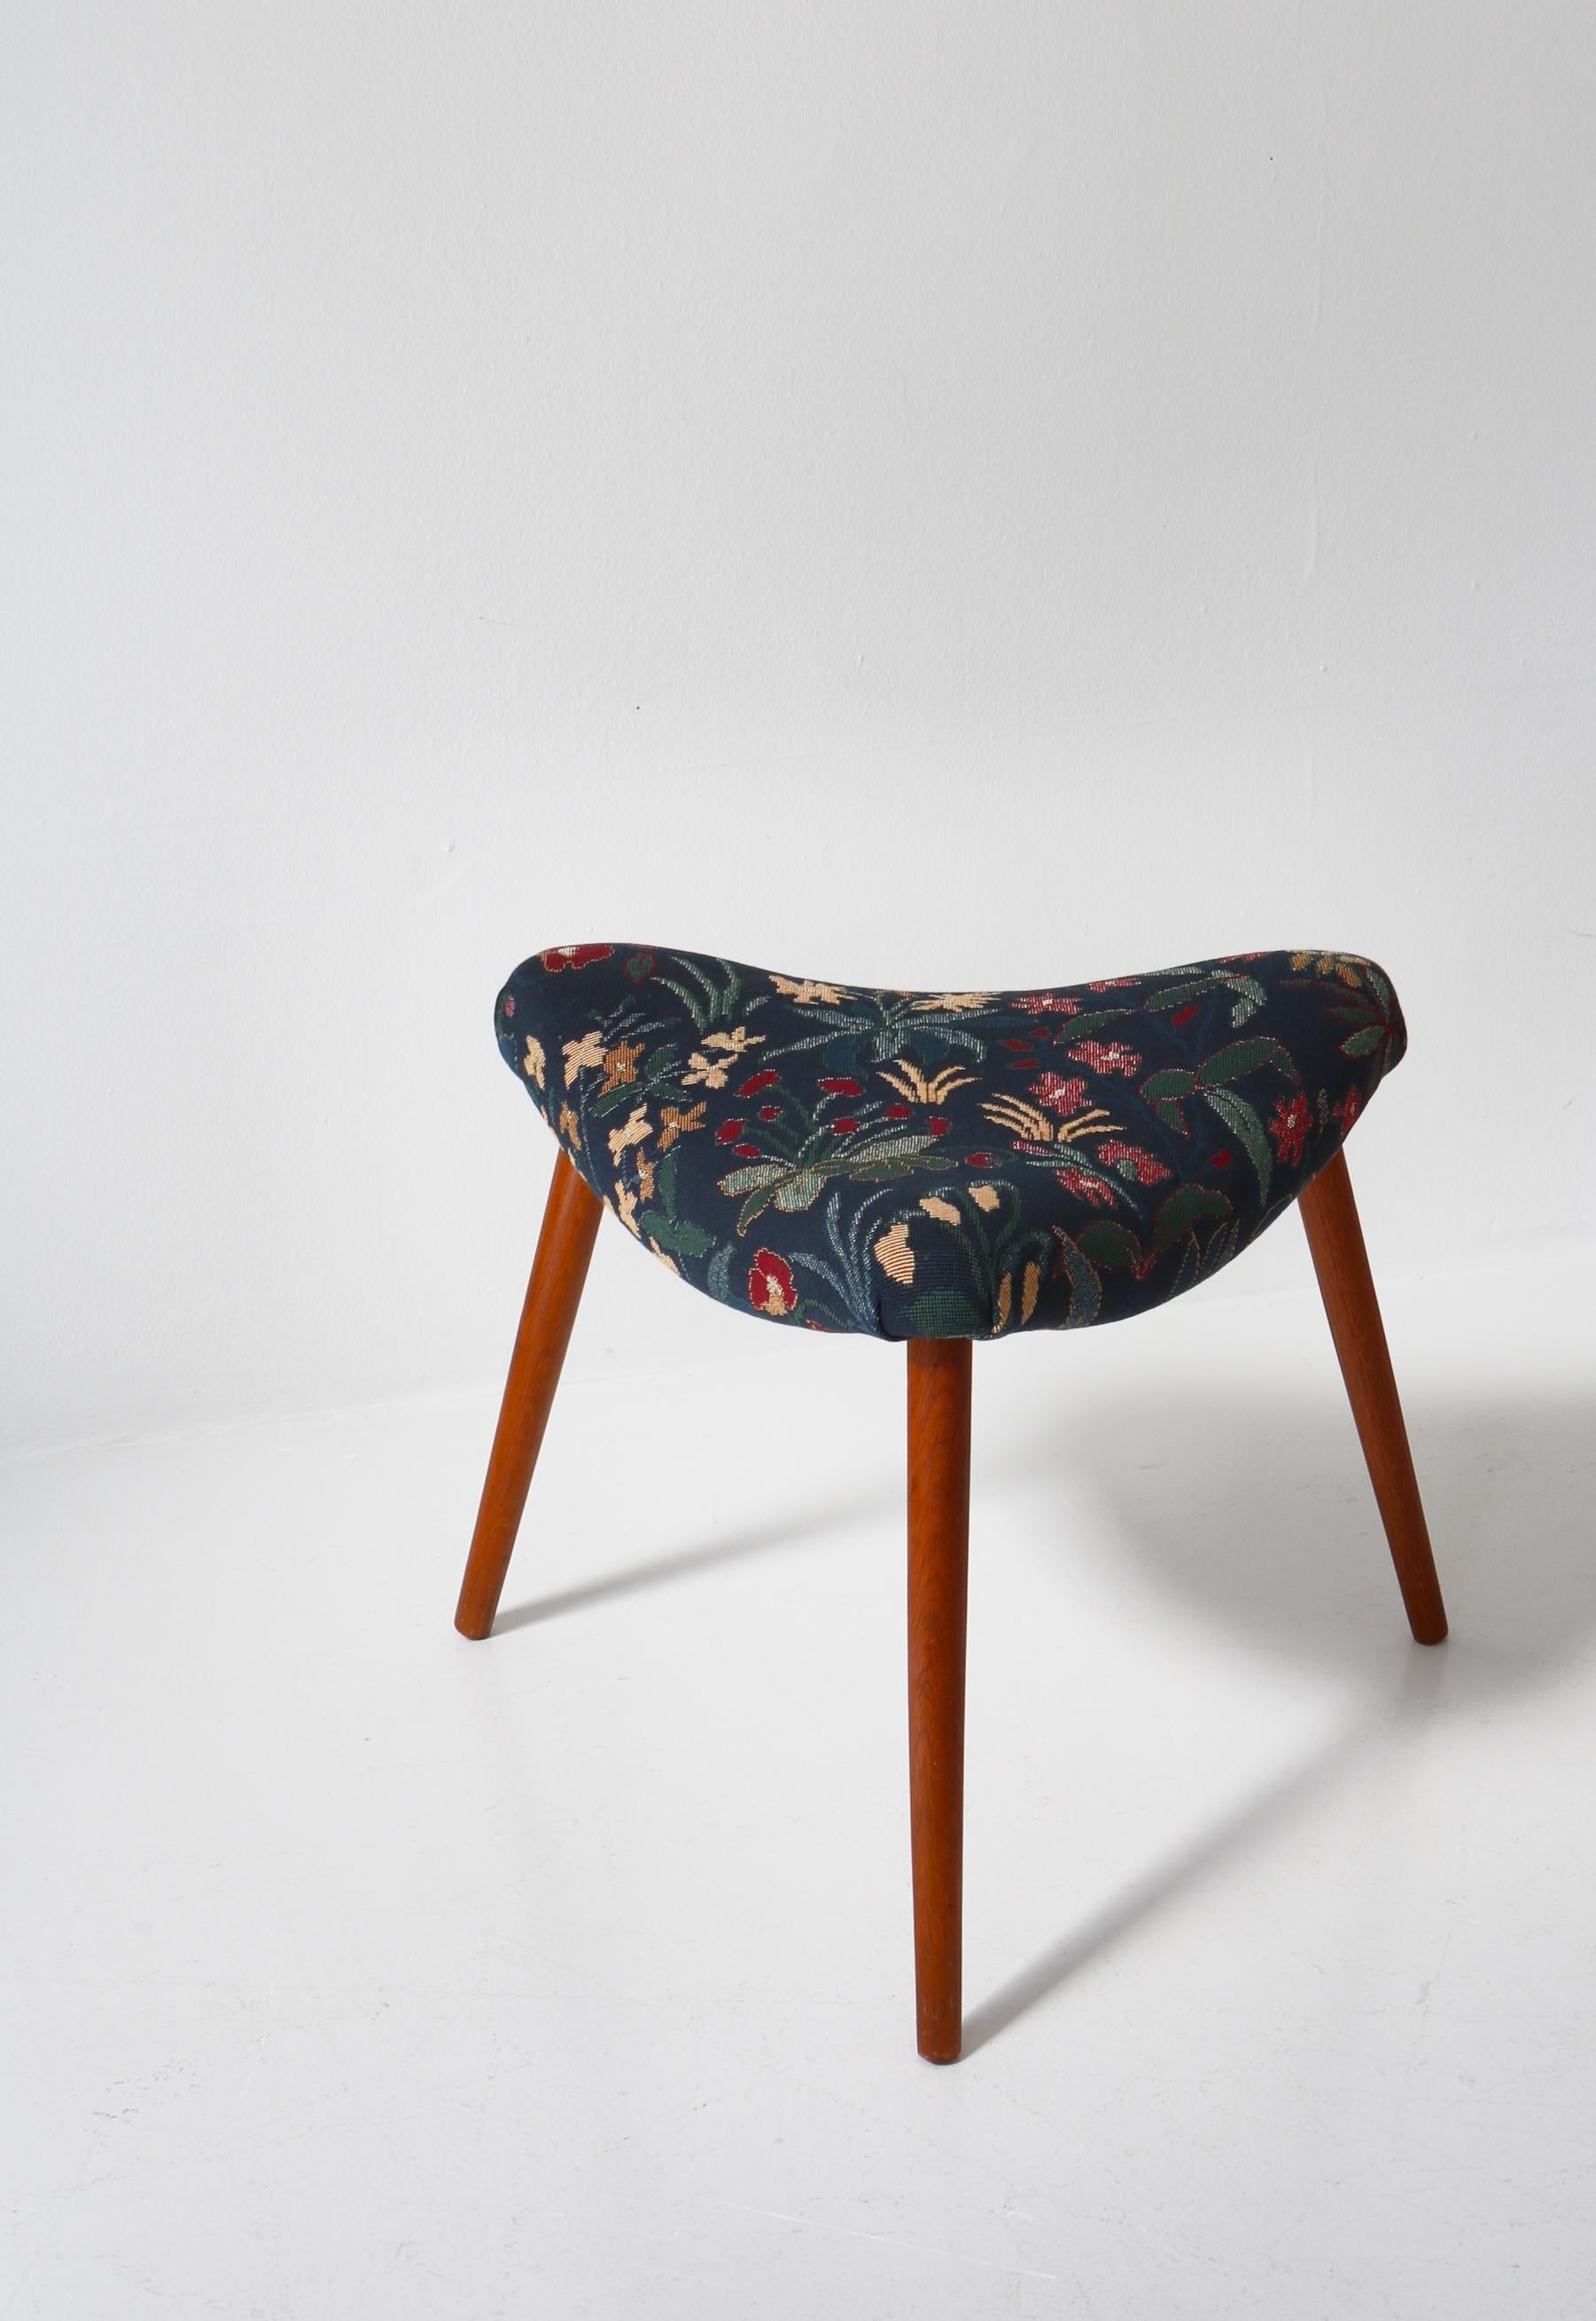 Scandinavian Modern Triangular Stools in Blue Floral Tapestry, 1950s In Good Condition For Sale In Odense, DK